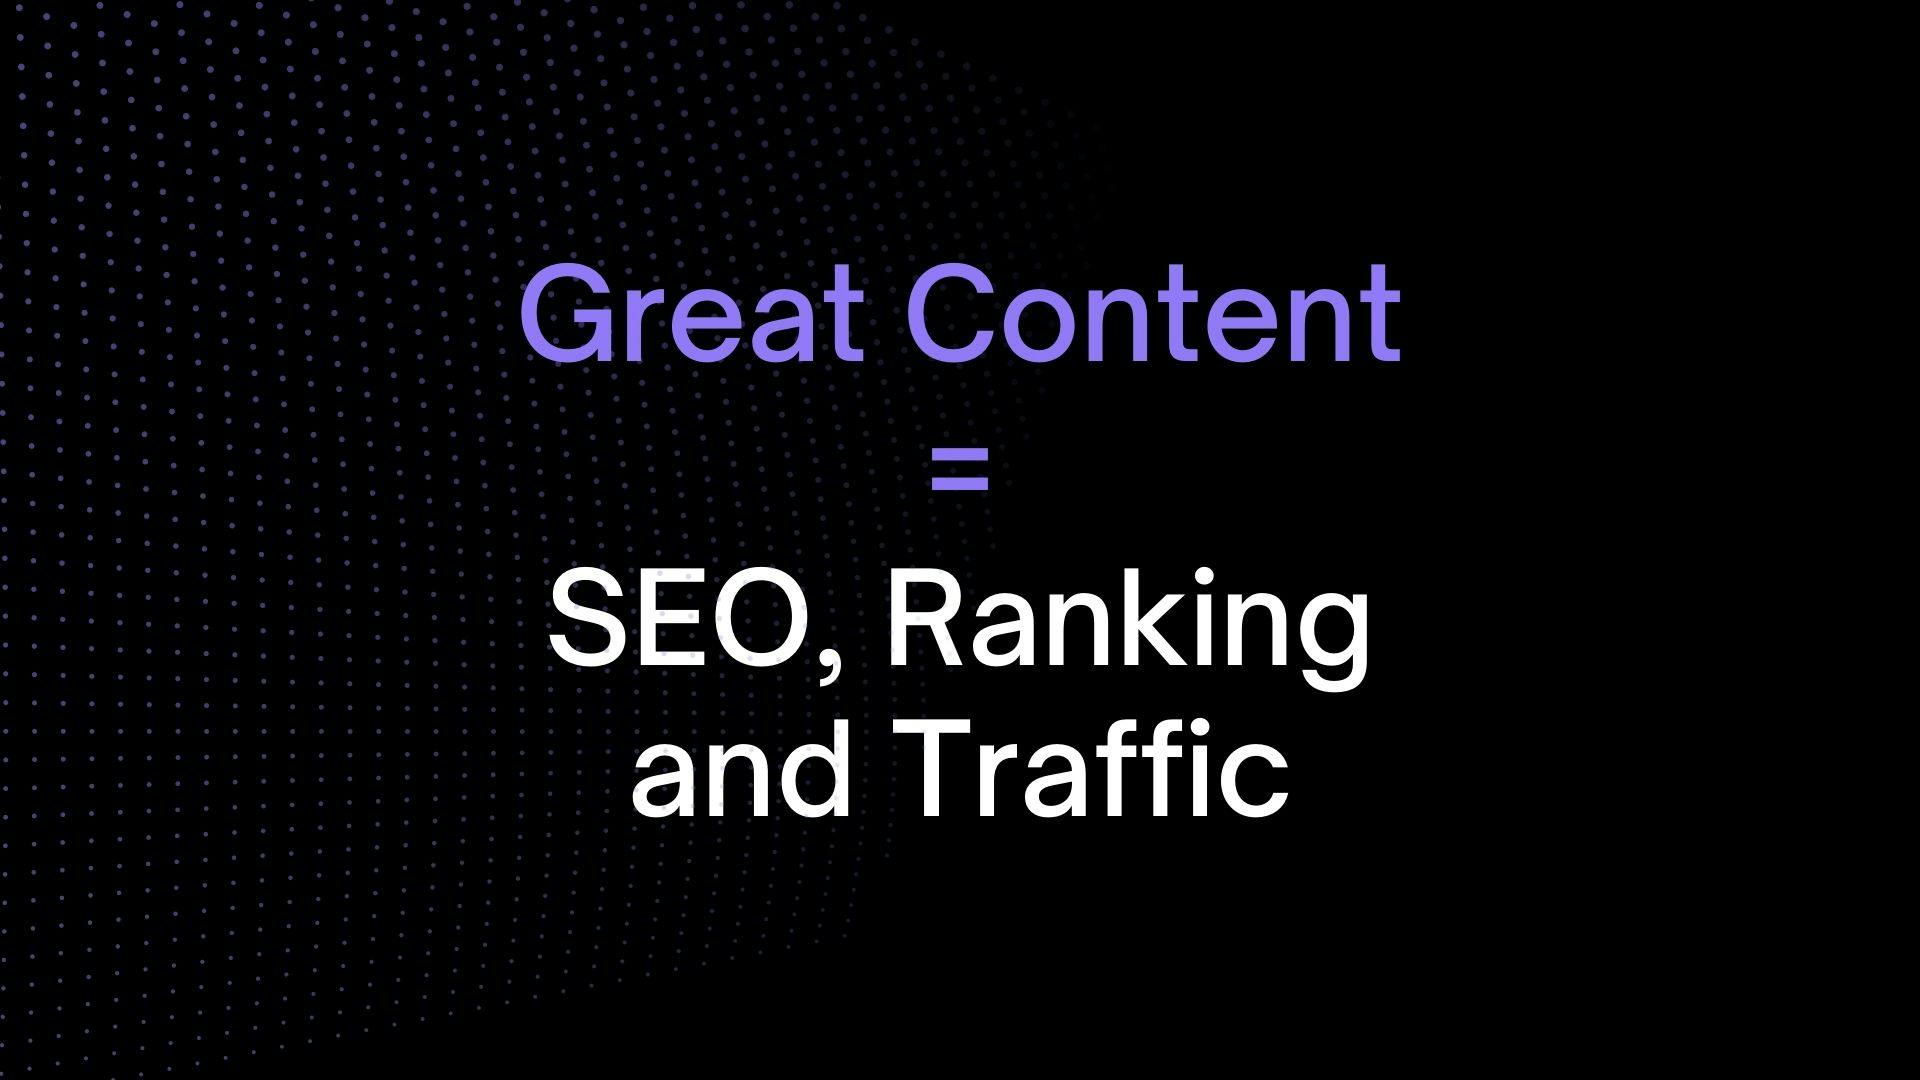 Great content is key to SEO, Ranking and Traffic, nothing else